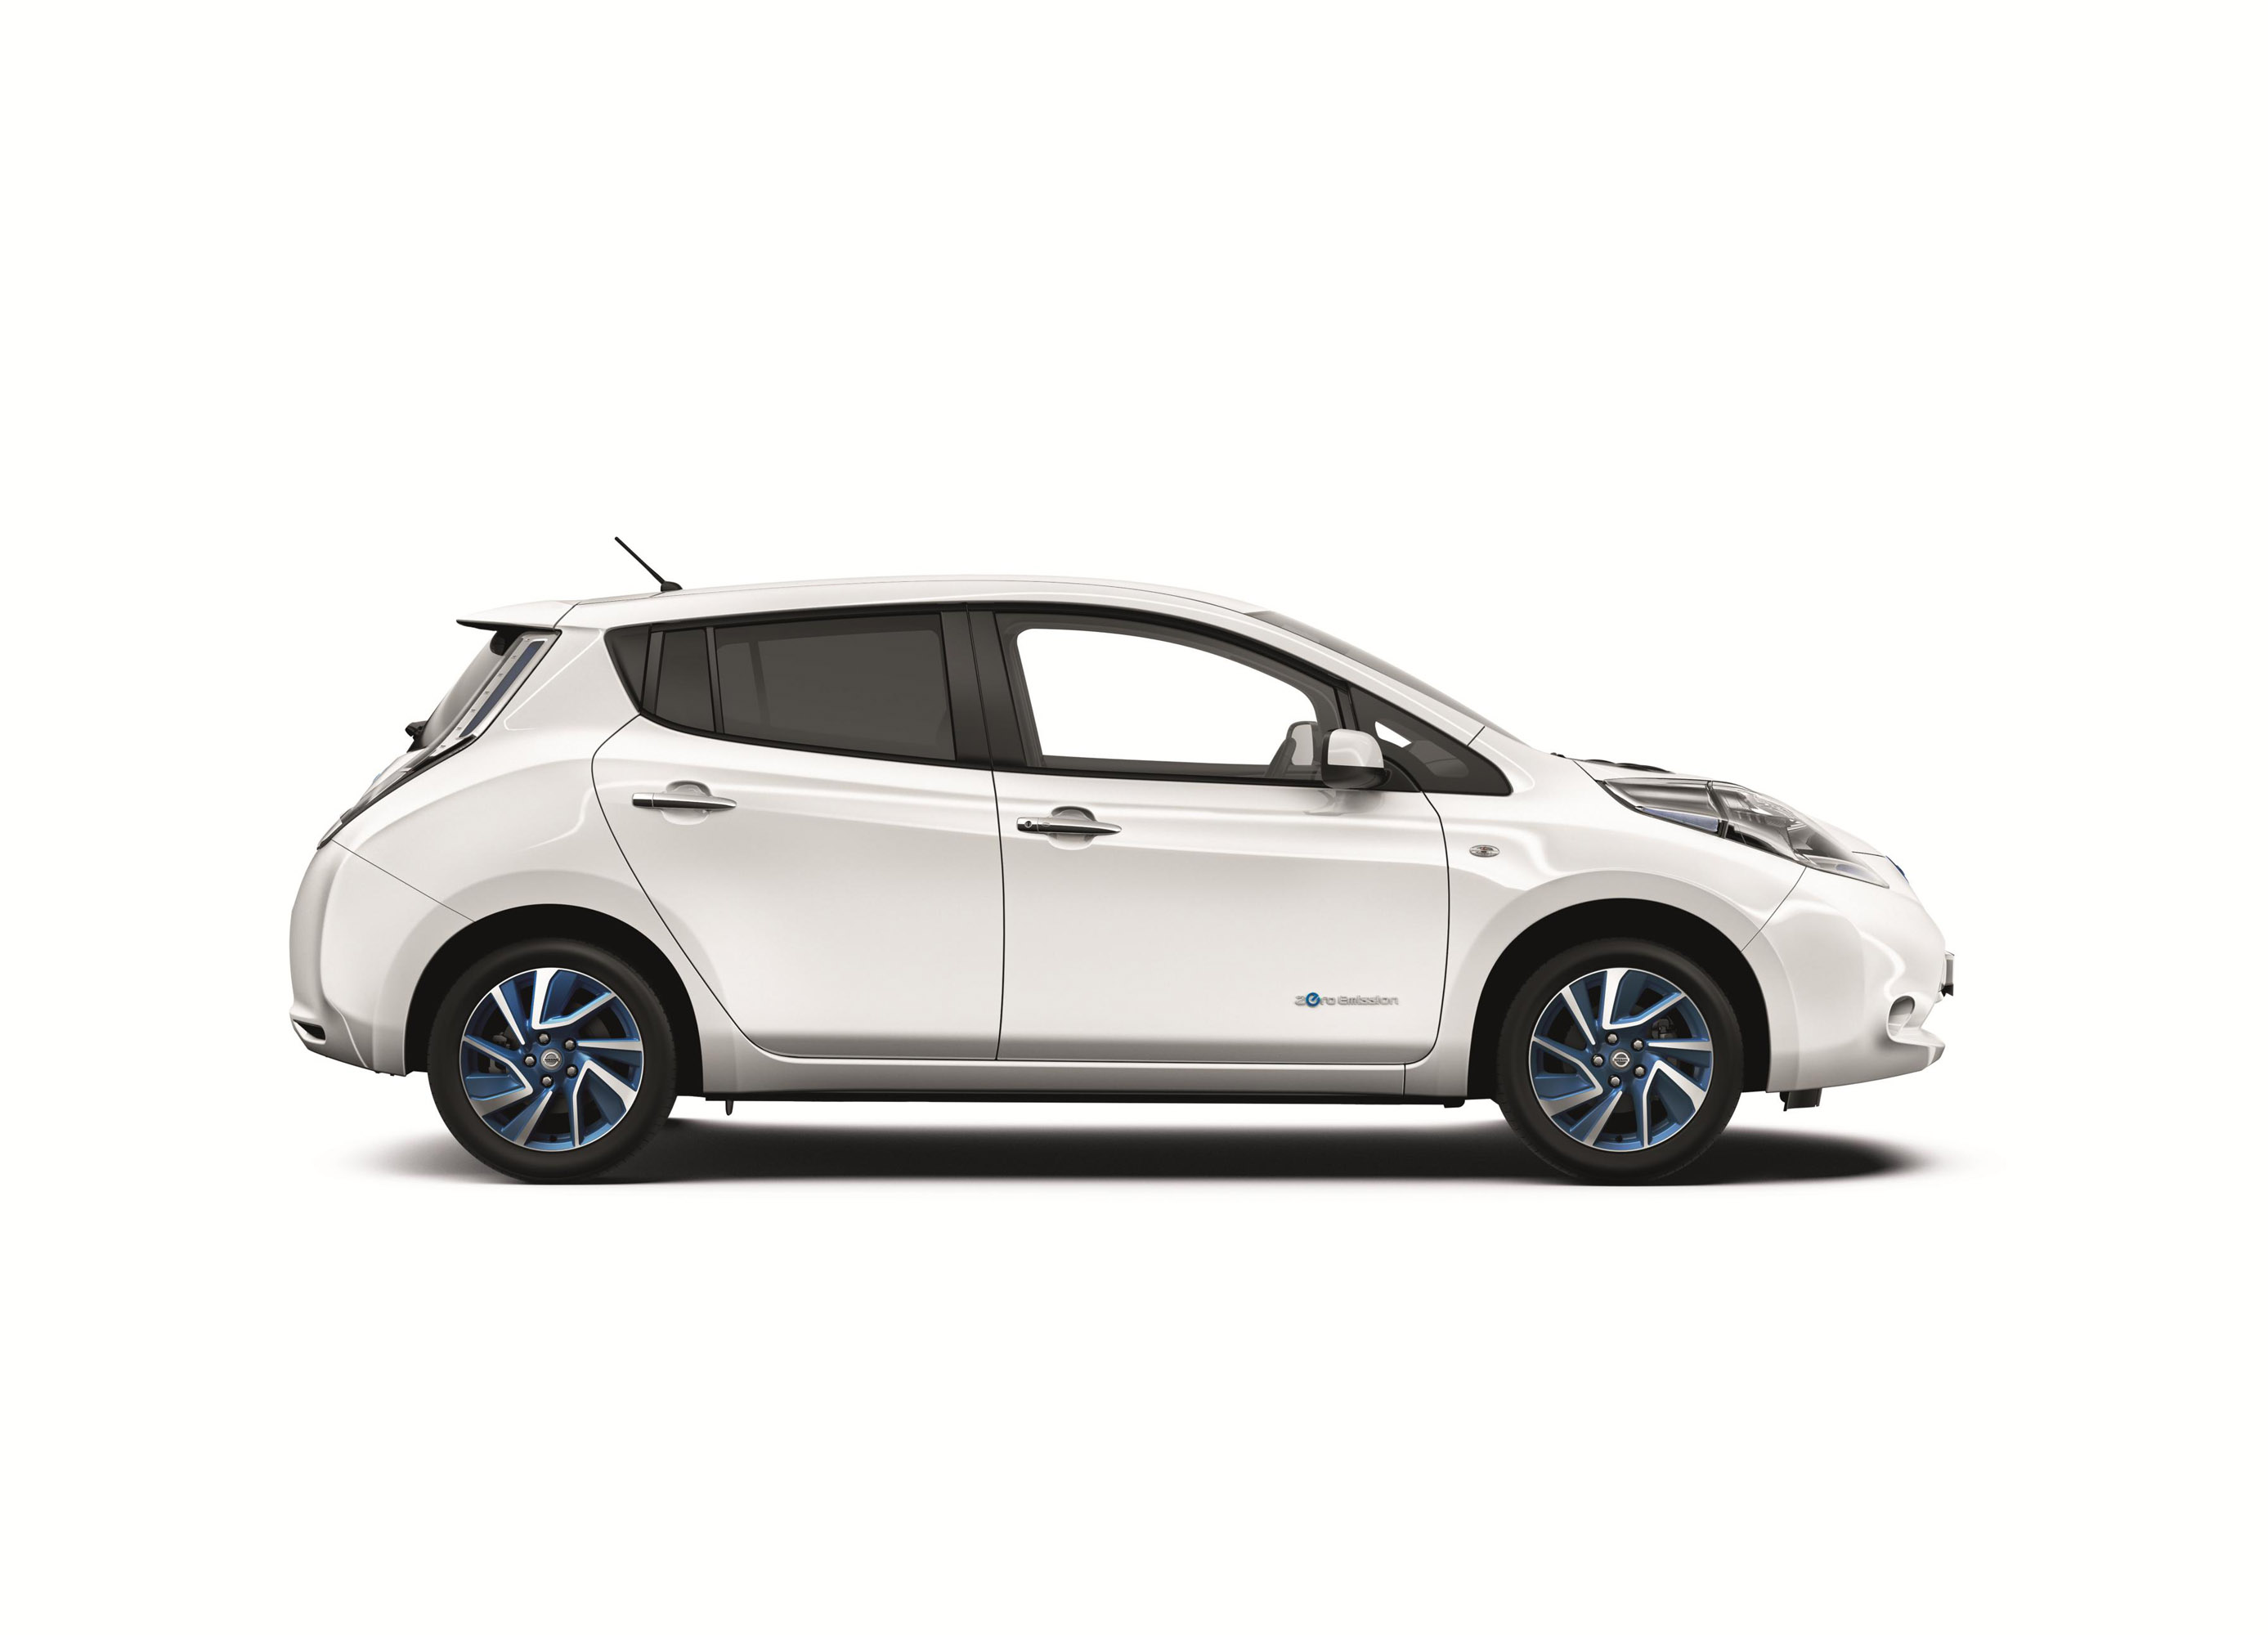 What is the range on a nissan leaf